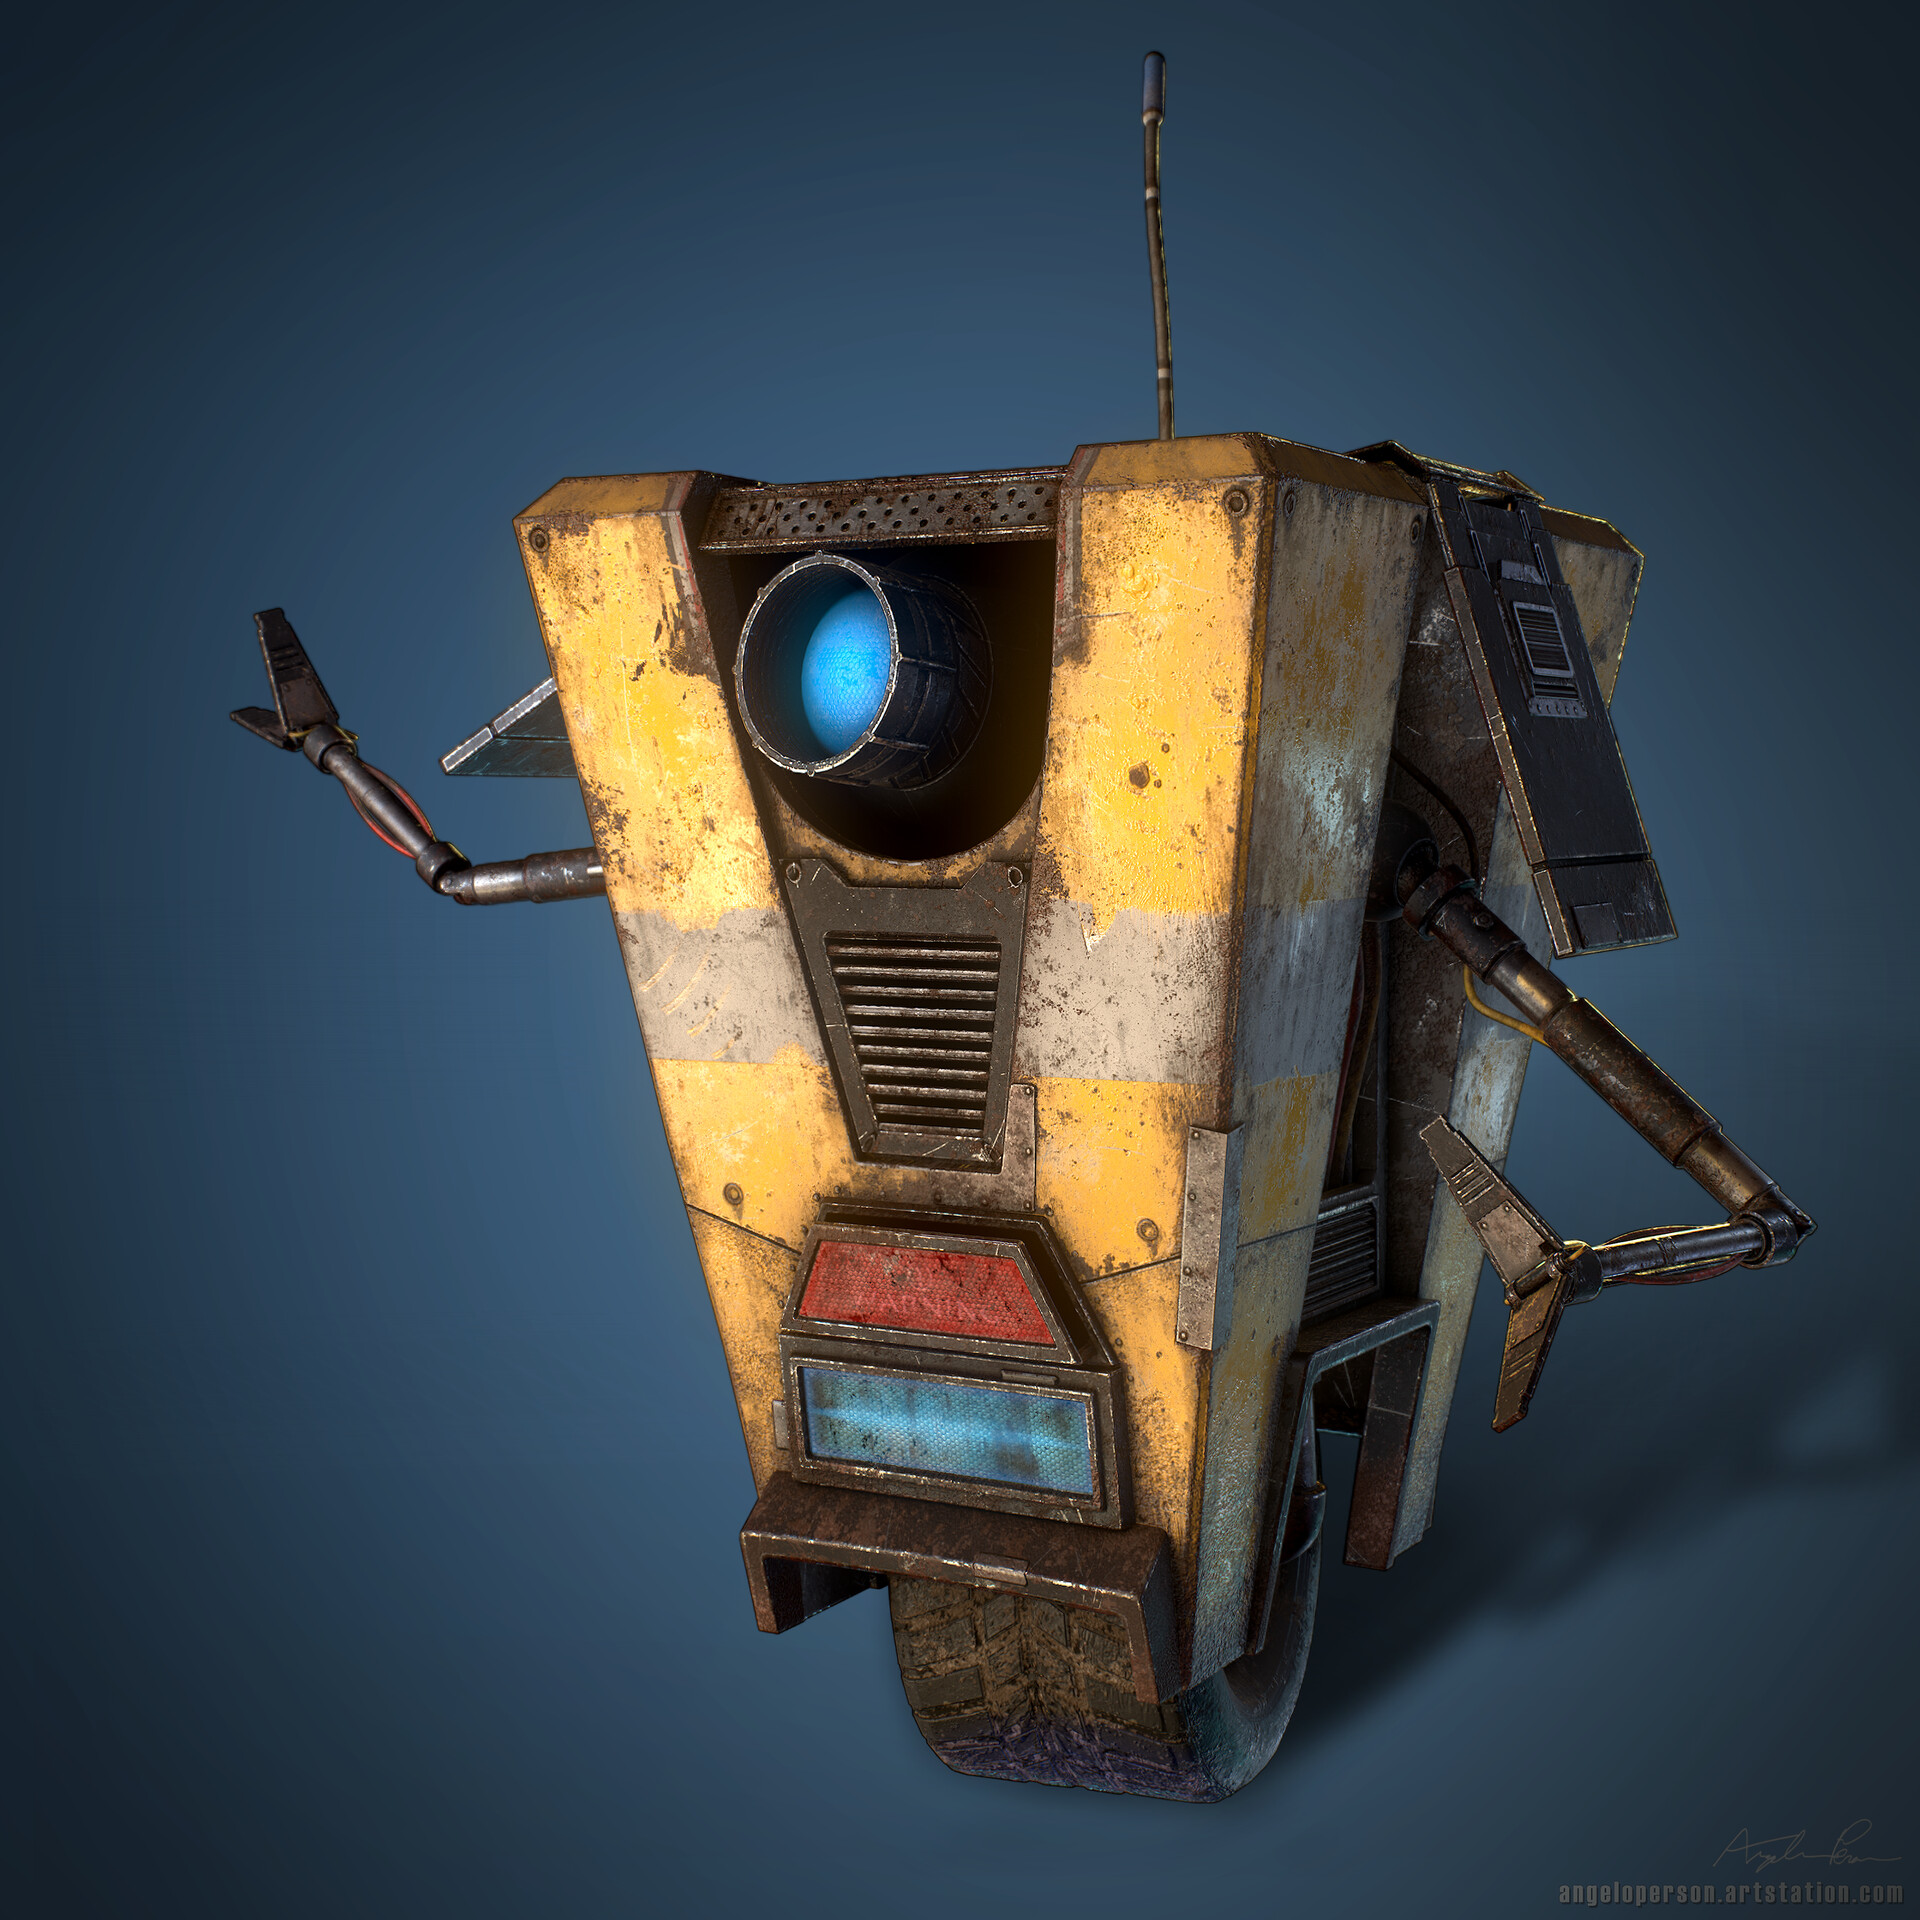 A fan art I did of Claptrap from the Borderlands series. 